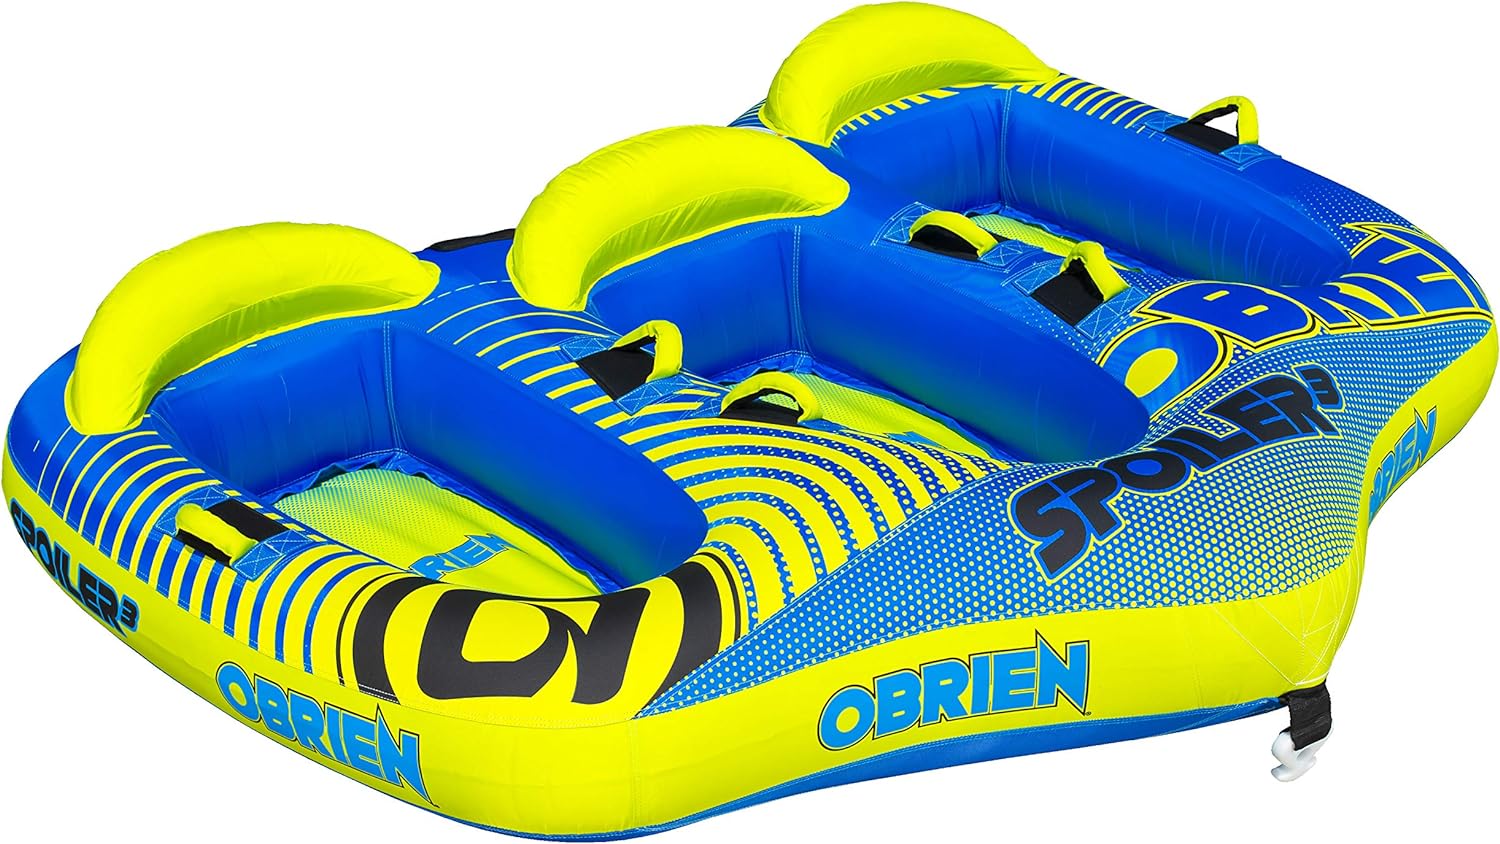 OBrien Spoiler 3 Person Inflatable Towable Tube, Yellow